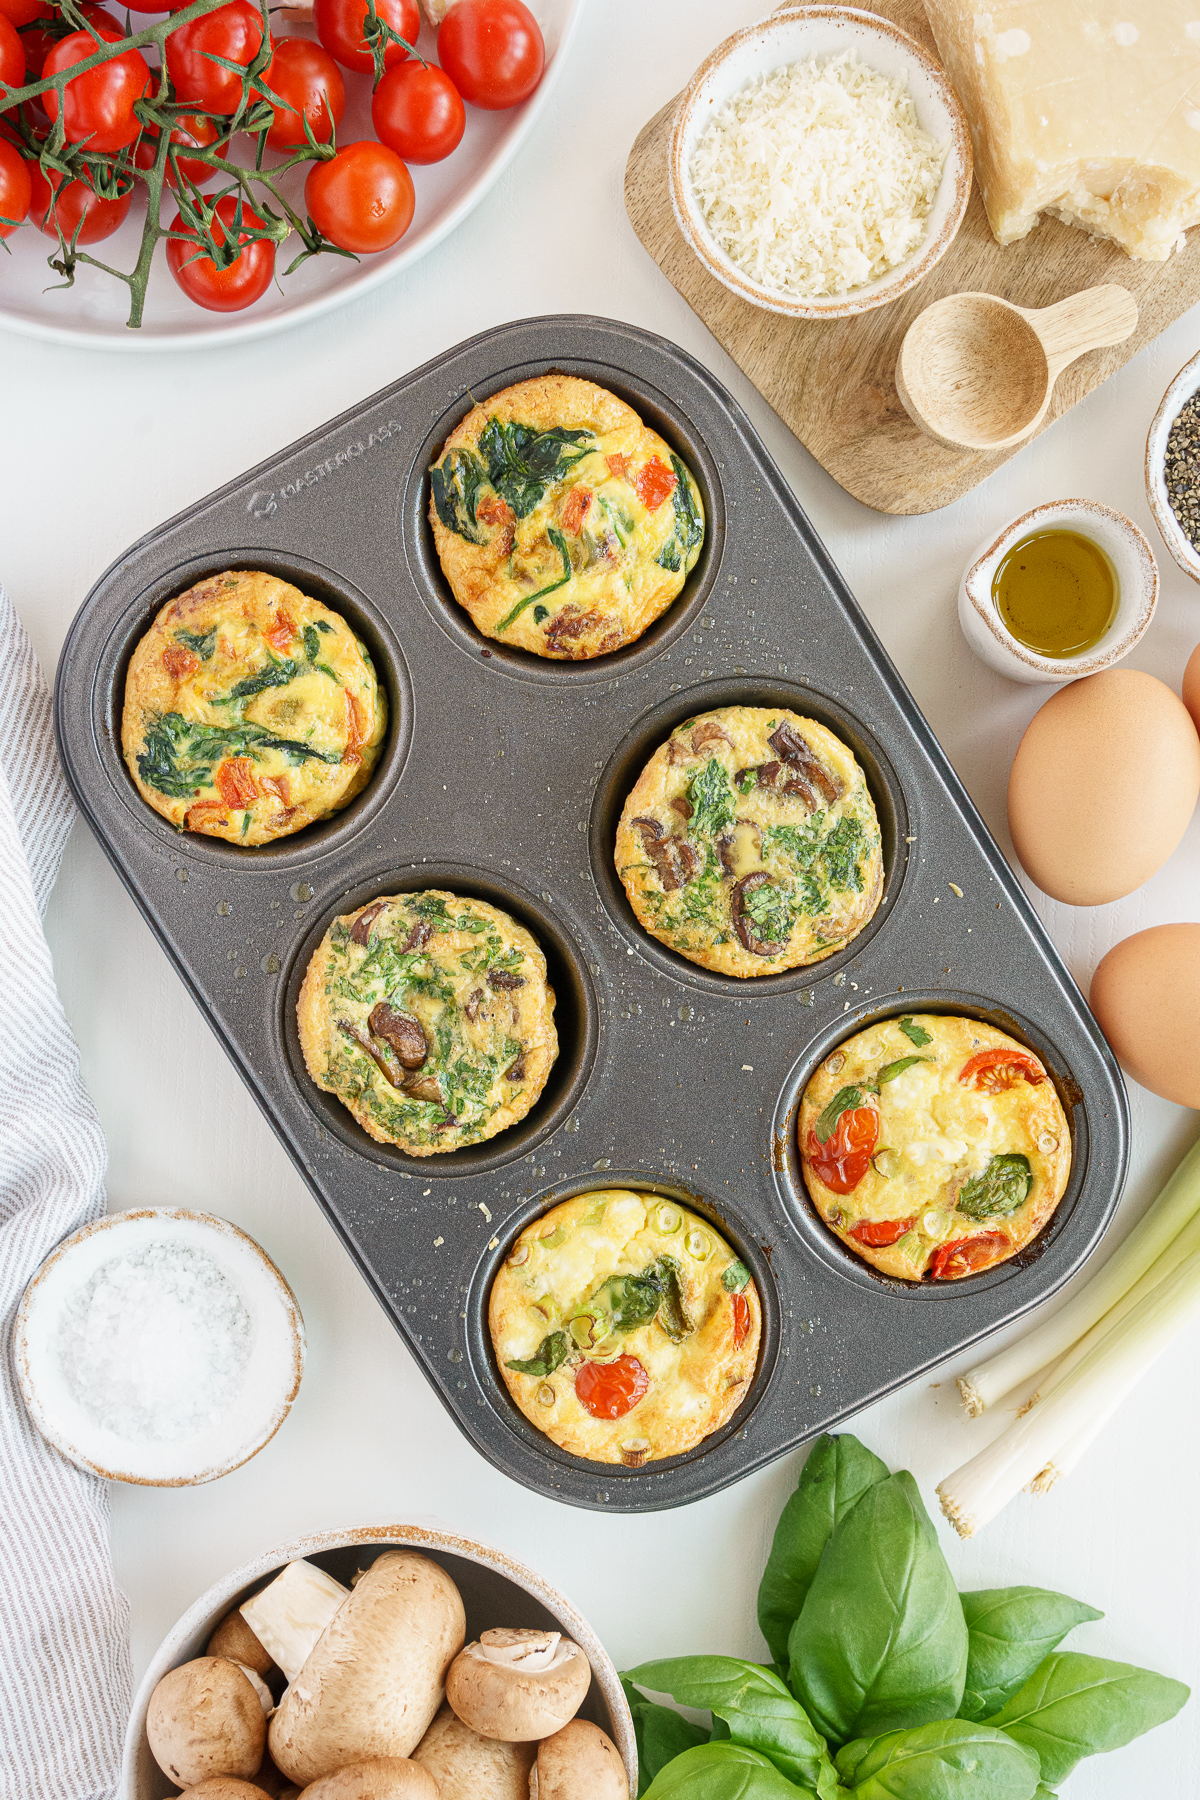 Egg muffins baked in the pan ready to serve.